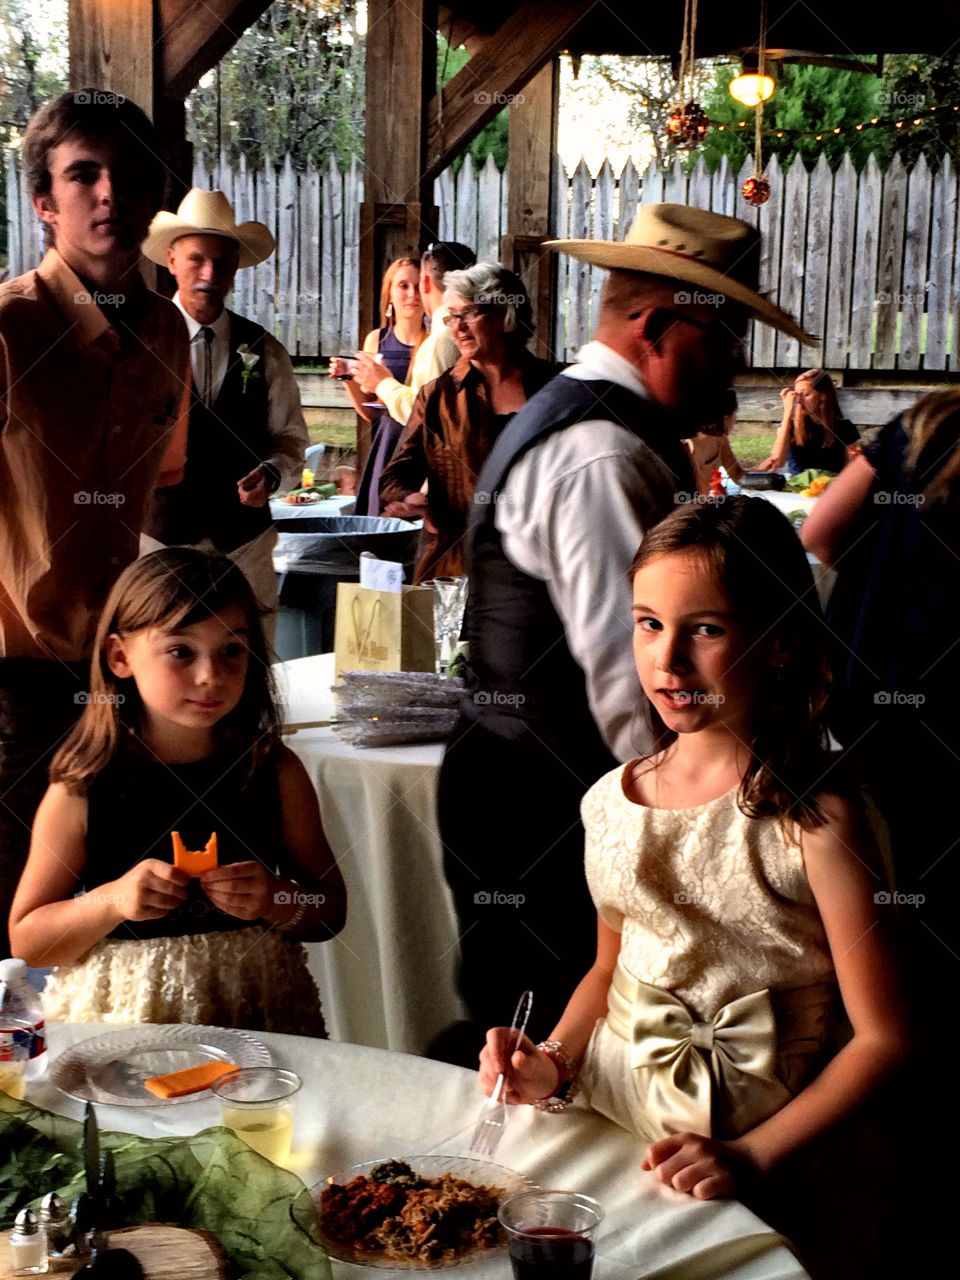 A candid portrait of two flower girls at a western-themed wedding.